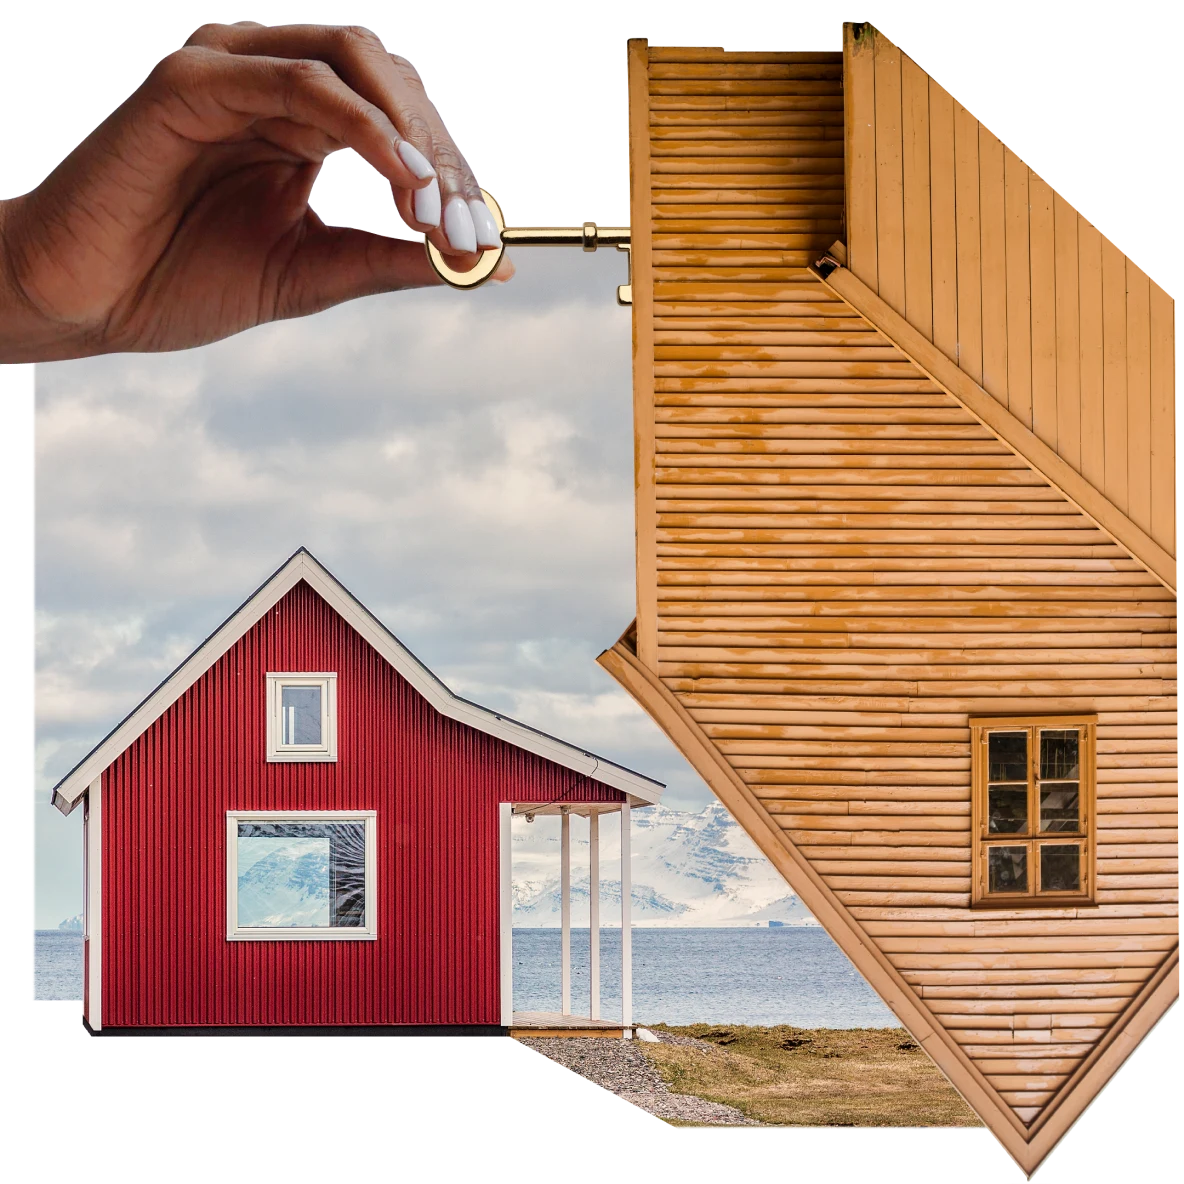 Collage of realty themes. Black hand turns the key to an upside-down wooden house. Red A-frame house with a porch in the background next to a lake, snowy mountains and blue sky in the distance. 